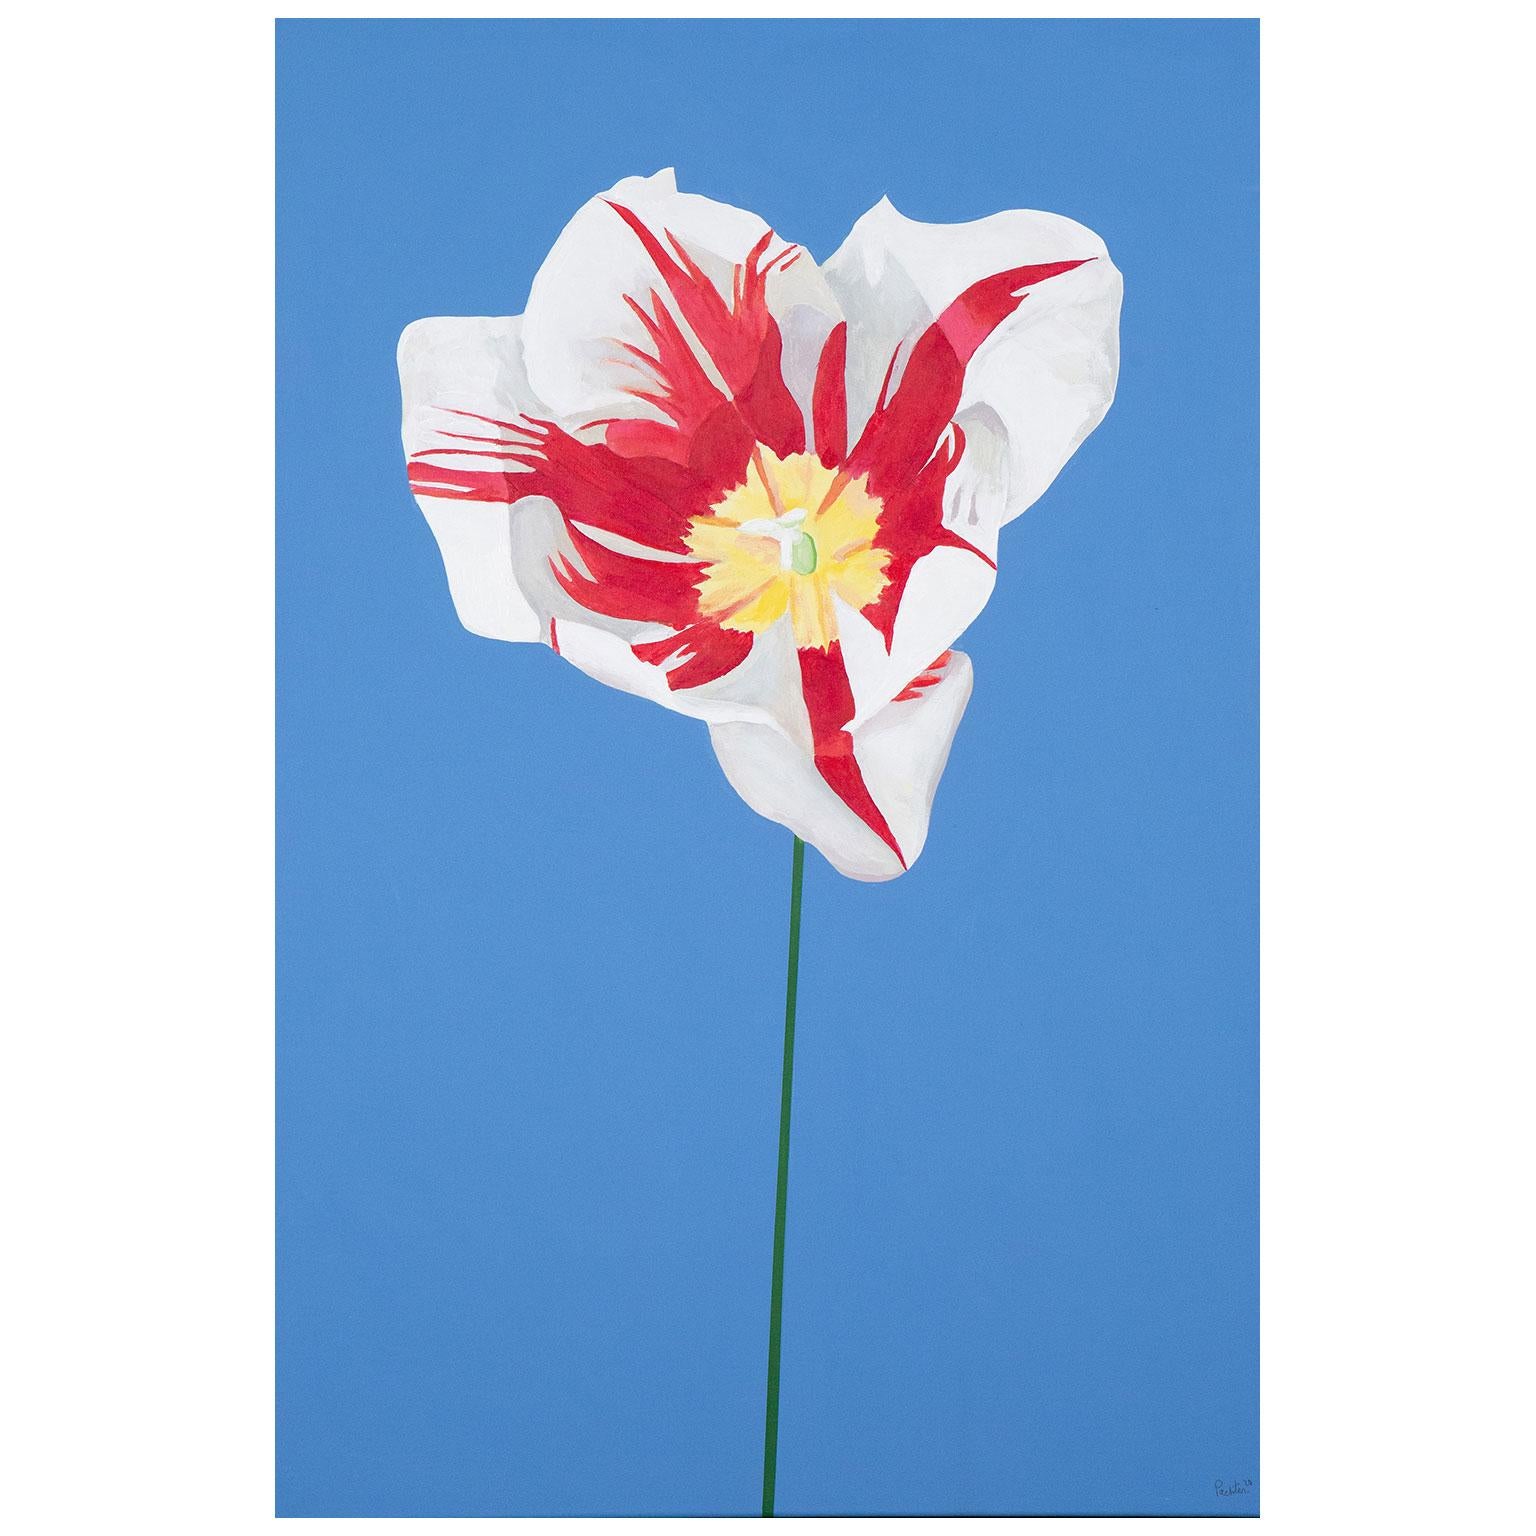 Grand Tulip - Painting by Charles Pachter